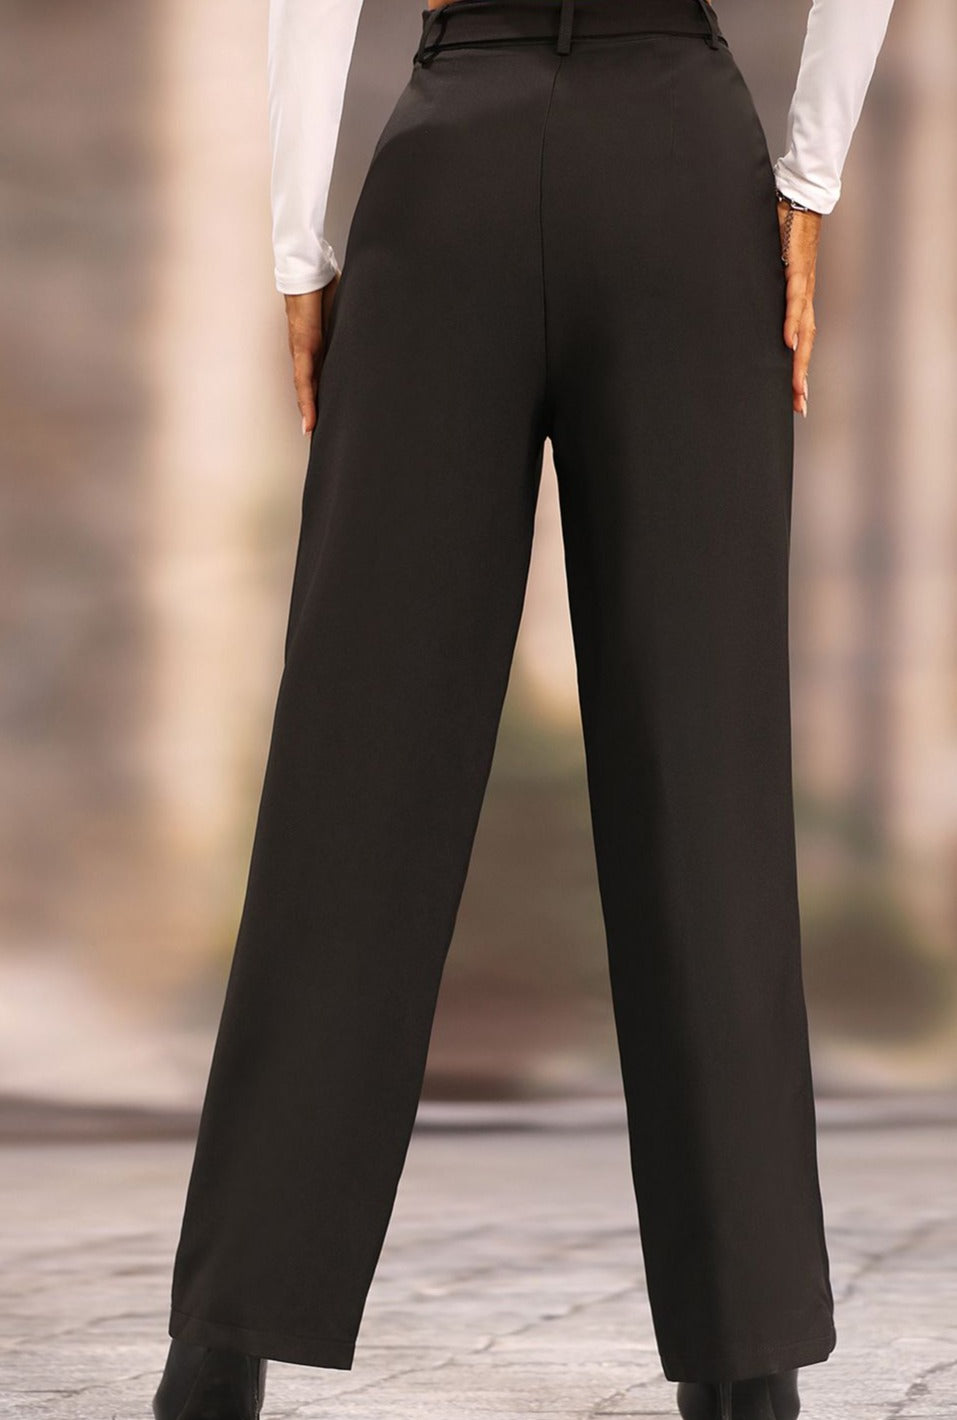 Long Loose Fit Straight Pants